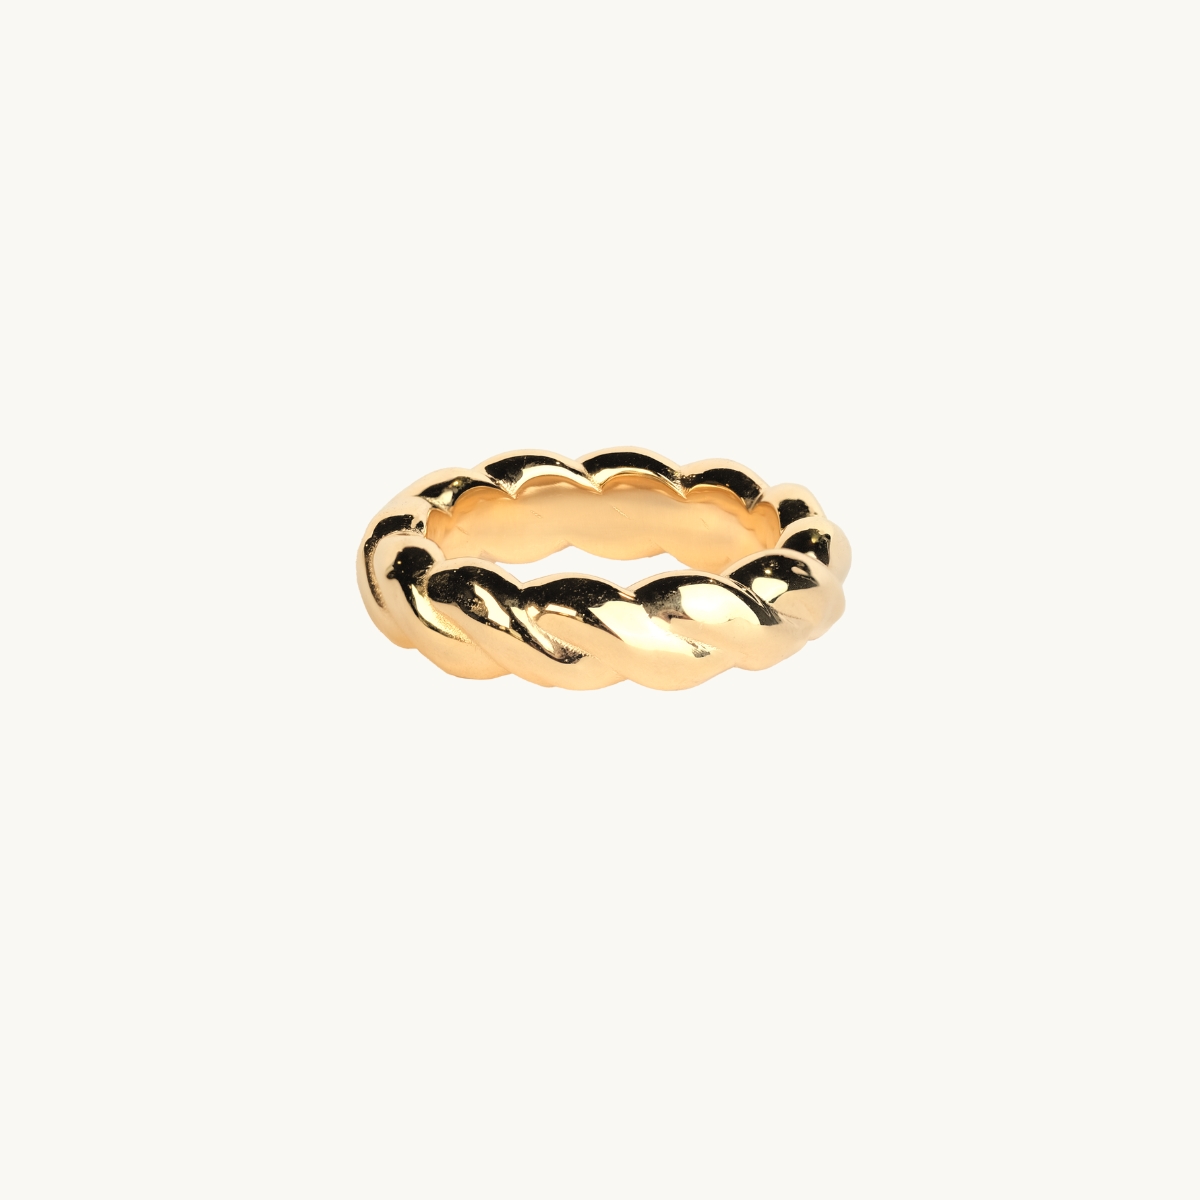 a band ring in a twisted pattern in 18k gold plated brass